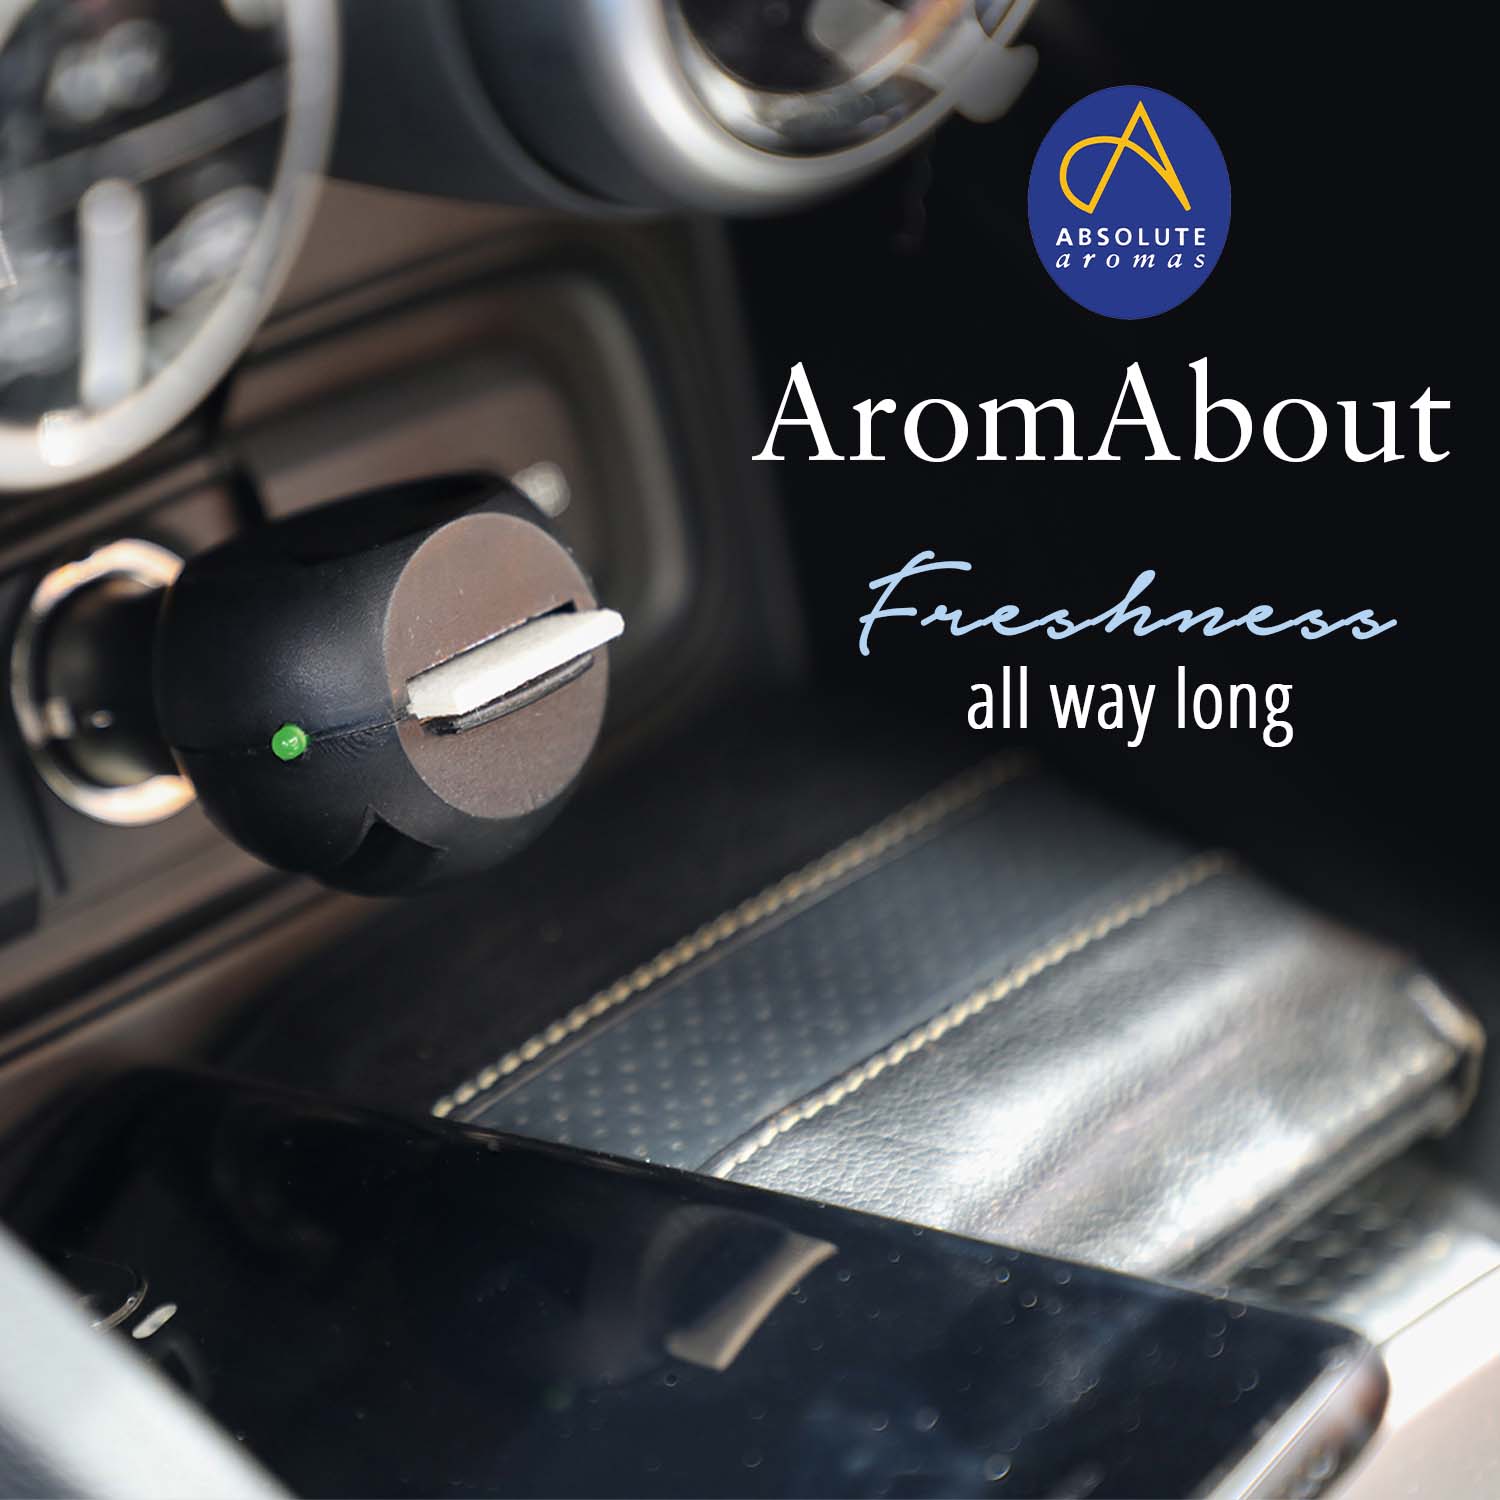 AromaAbout freshness all way long